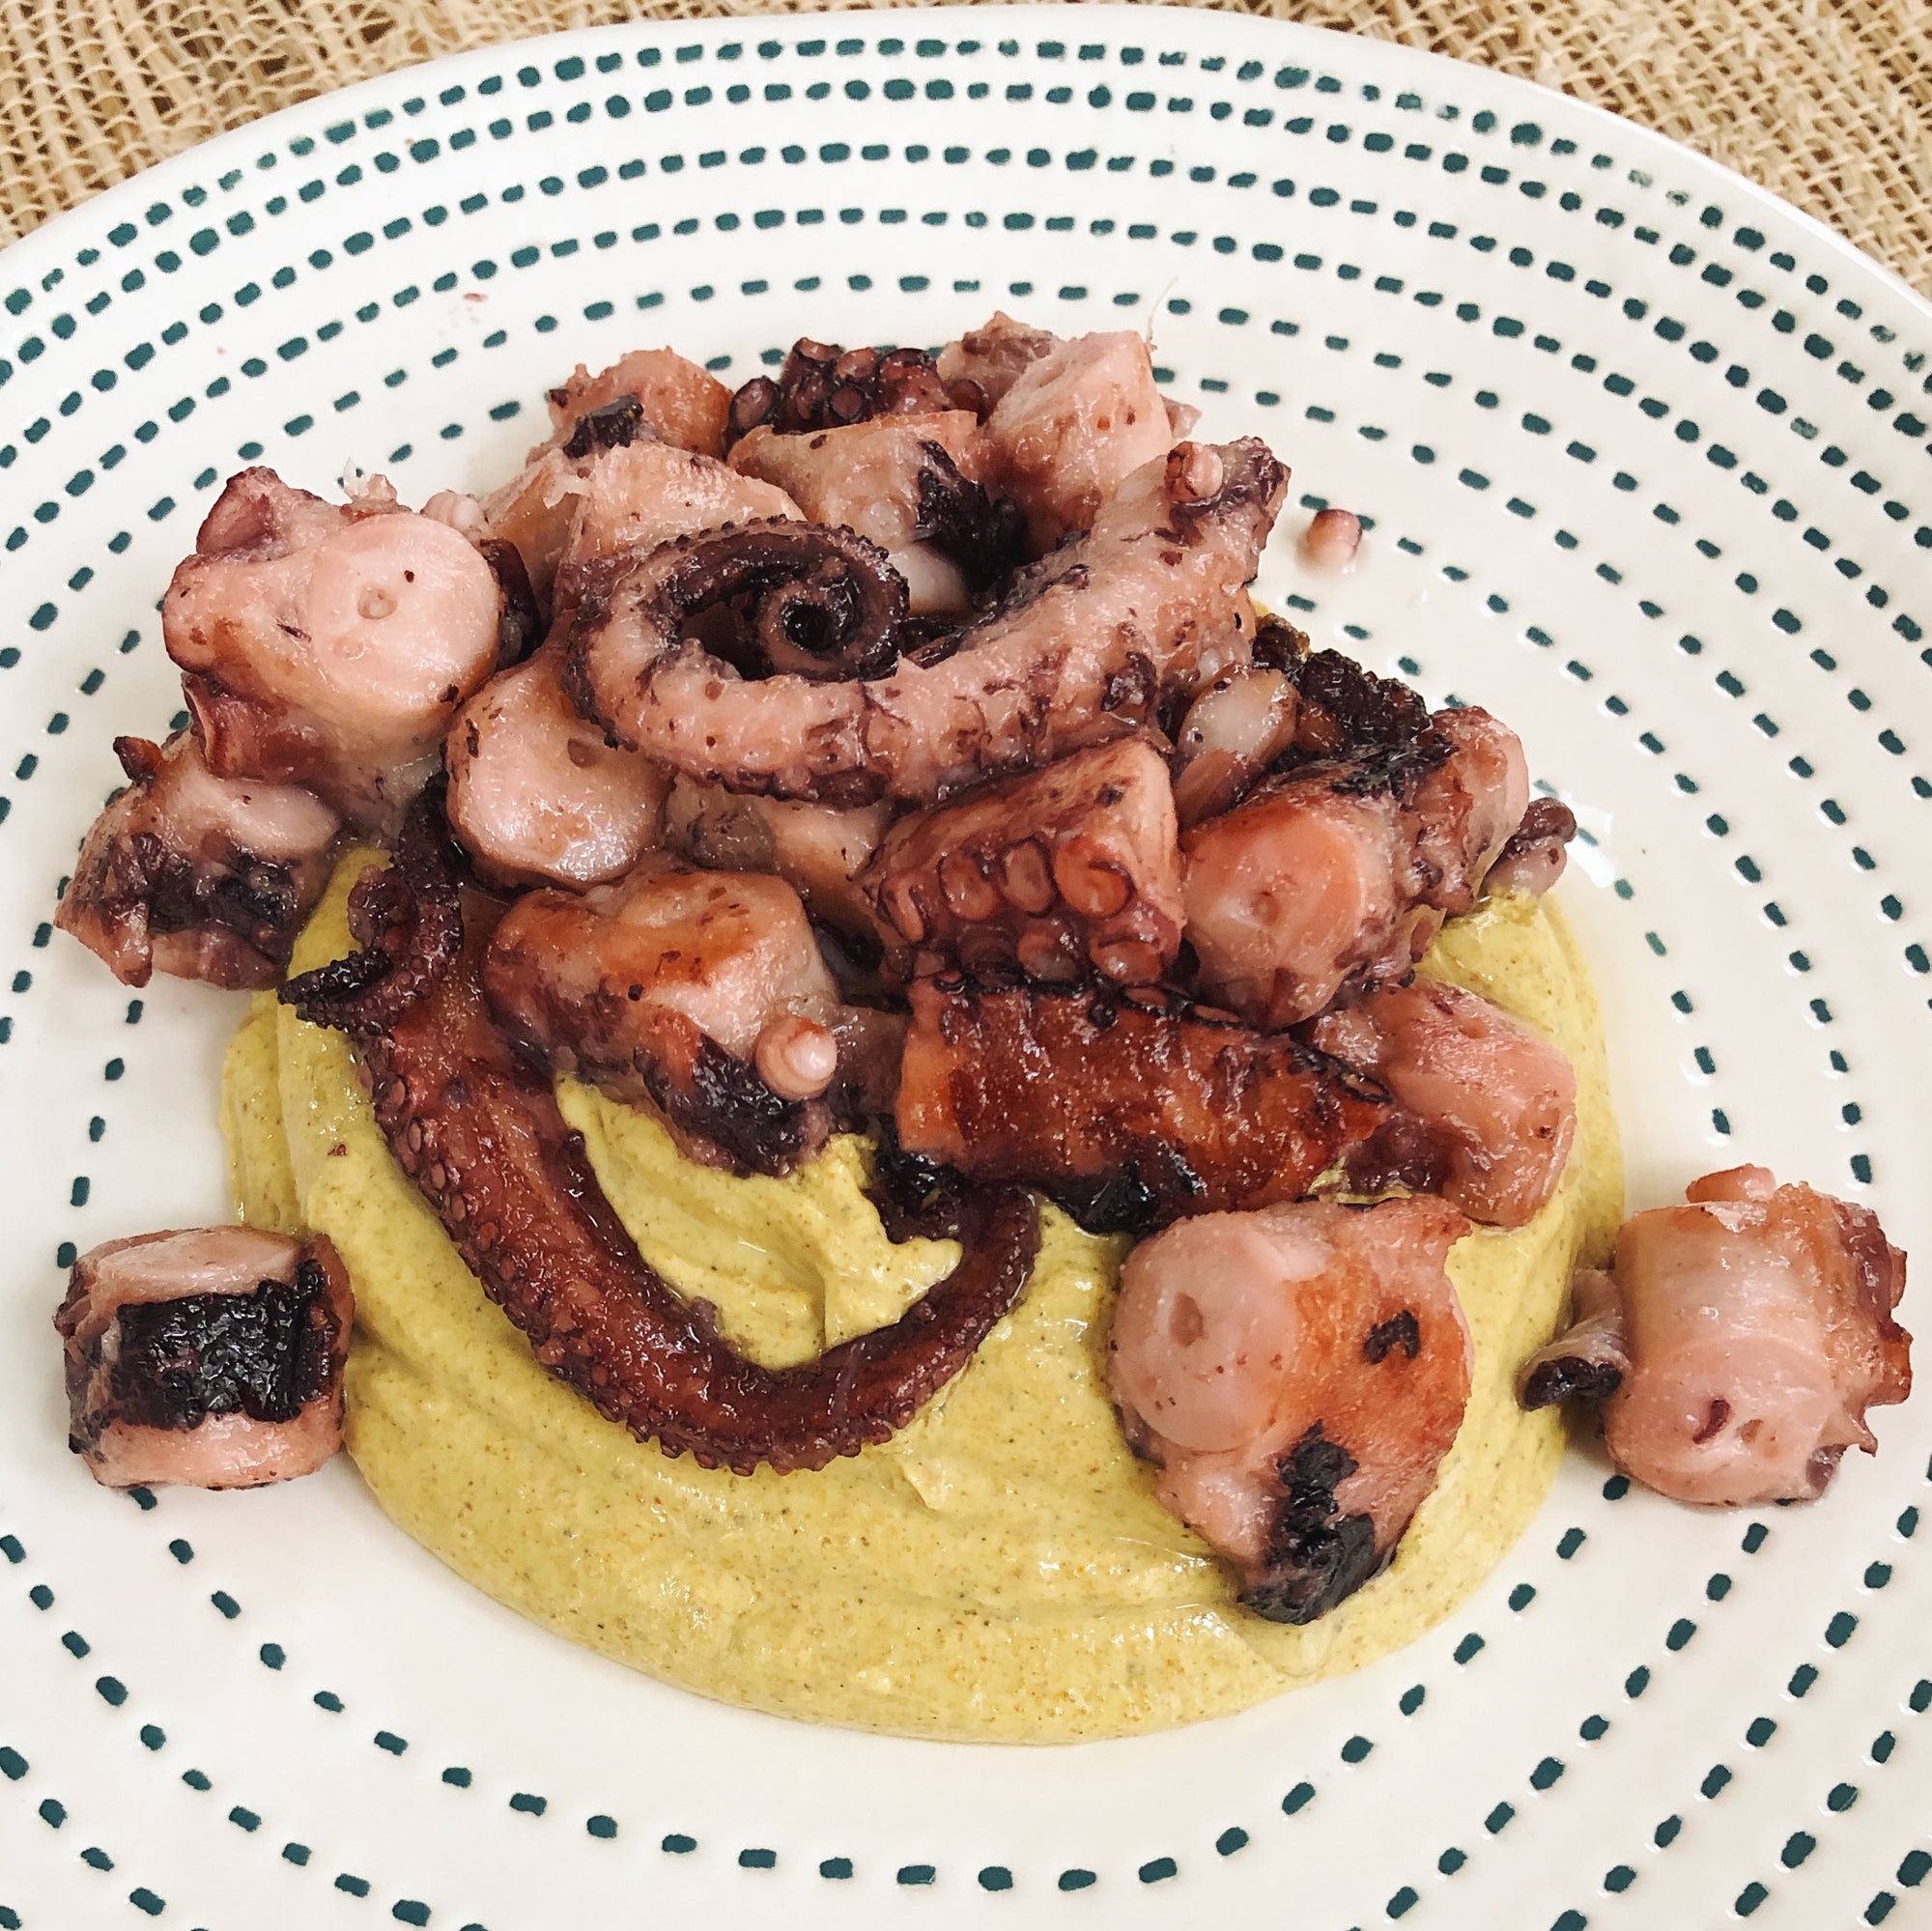 Octopus in olive oil with curry yogurt sauce - Donostia Foods